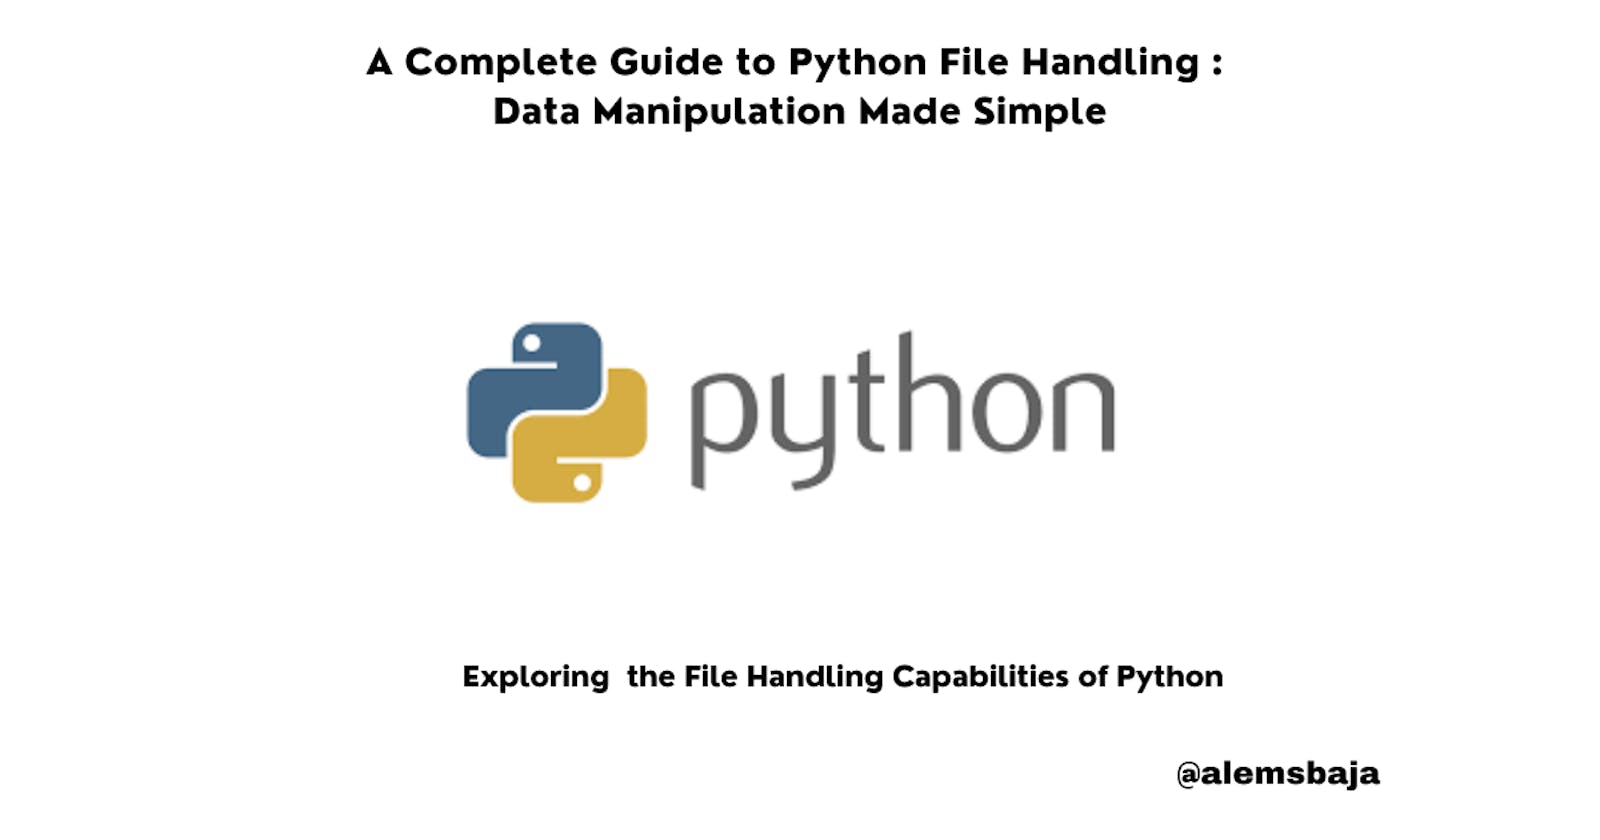 A Complete Guide to Python File Handling: Data Manipulation Made Simple